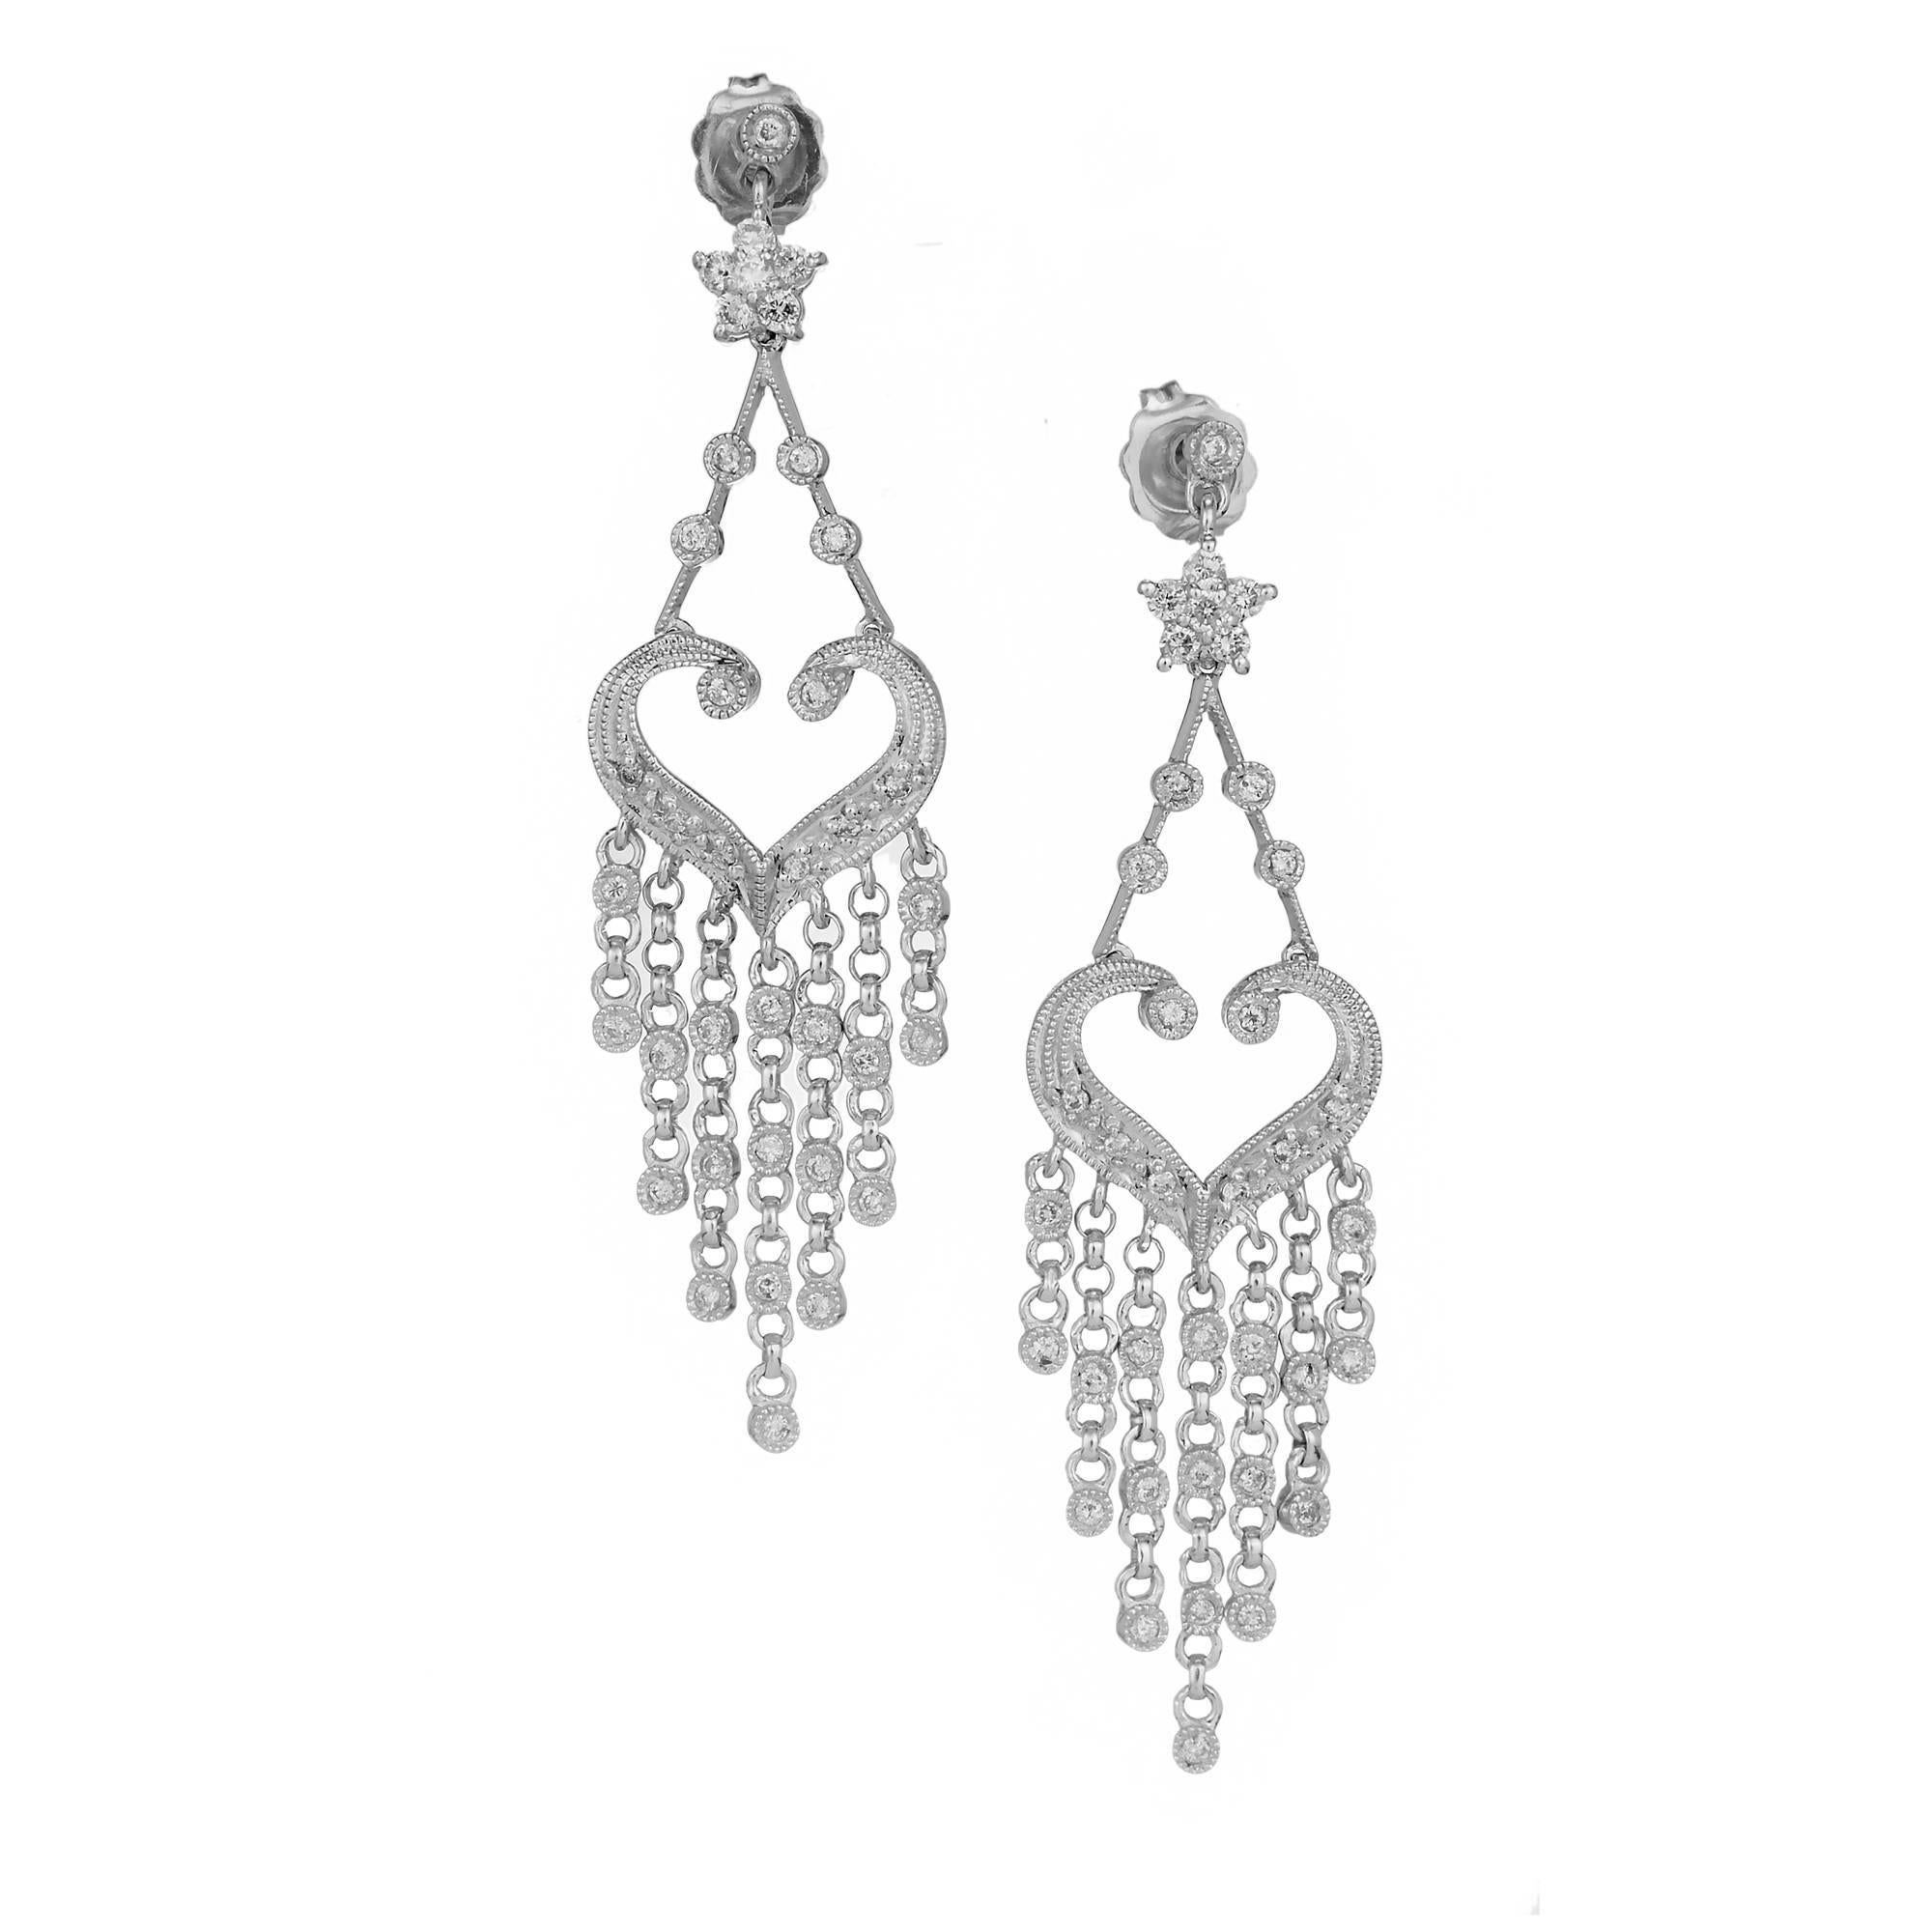 Chandelier style dangle earrings with full cut Diamonds in 14k white gold.

74 round Diamonds, approx. total weight .58cts, H, SI1
14k white gold
6.4 grams
Tested: 14k
Stamped: 585
Hallmark: 029
Top to bottom: 50.85mm or 2.0 inches
Width: 13.70mm or